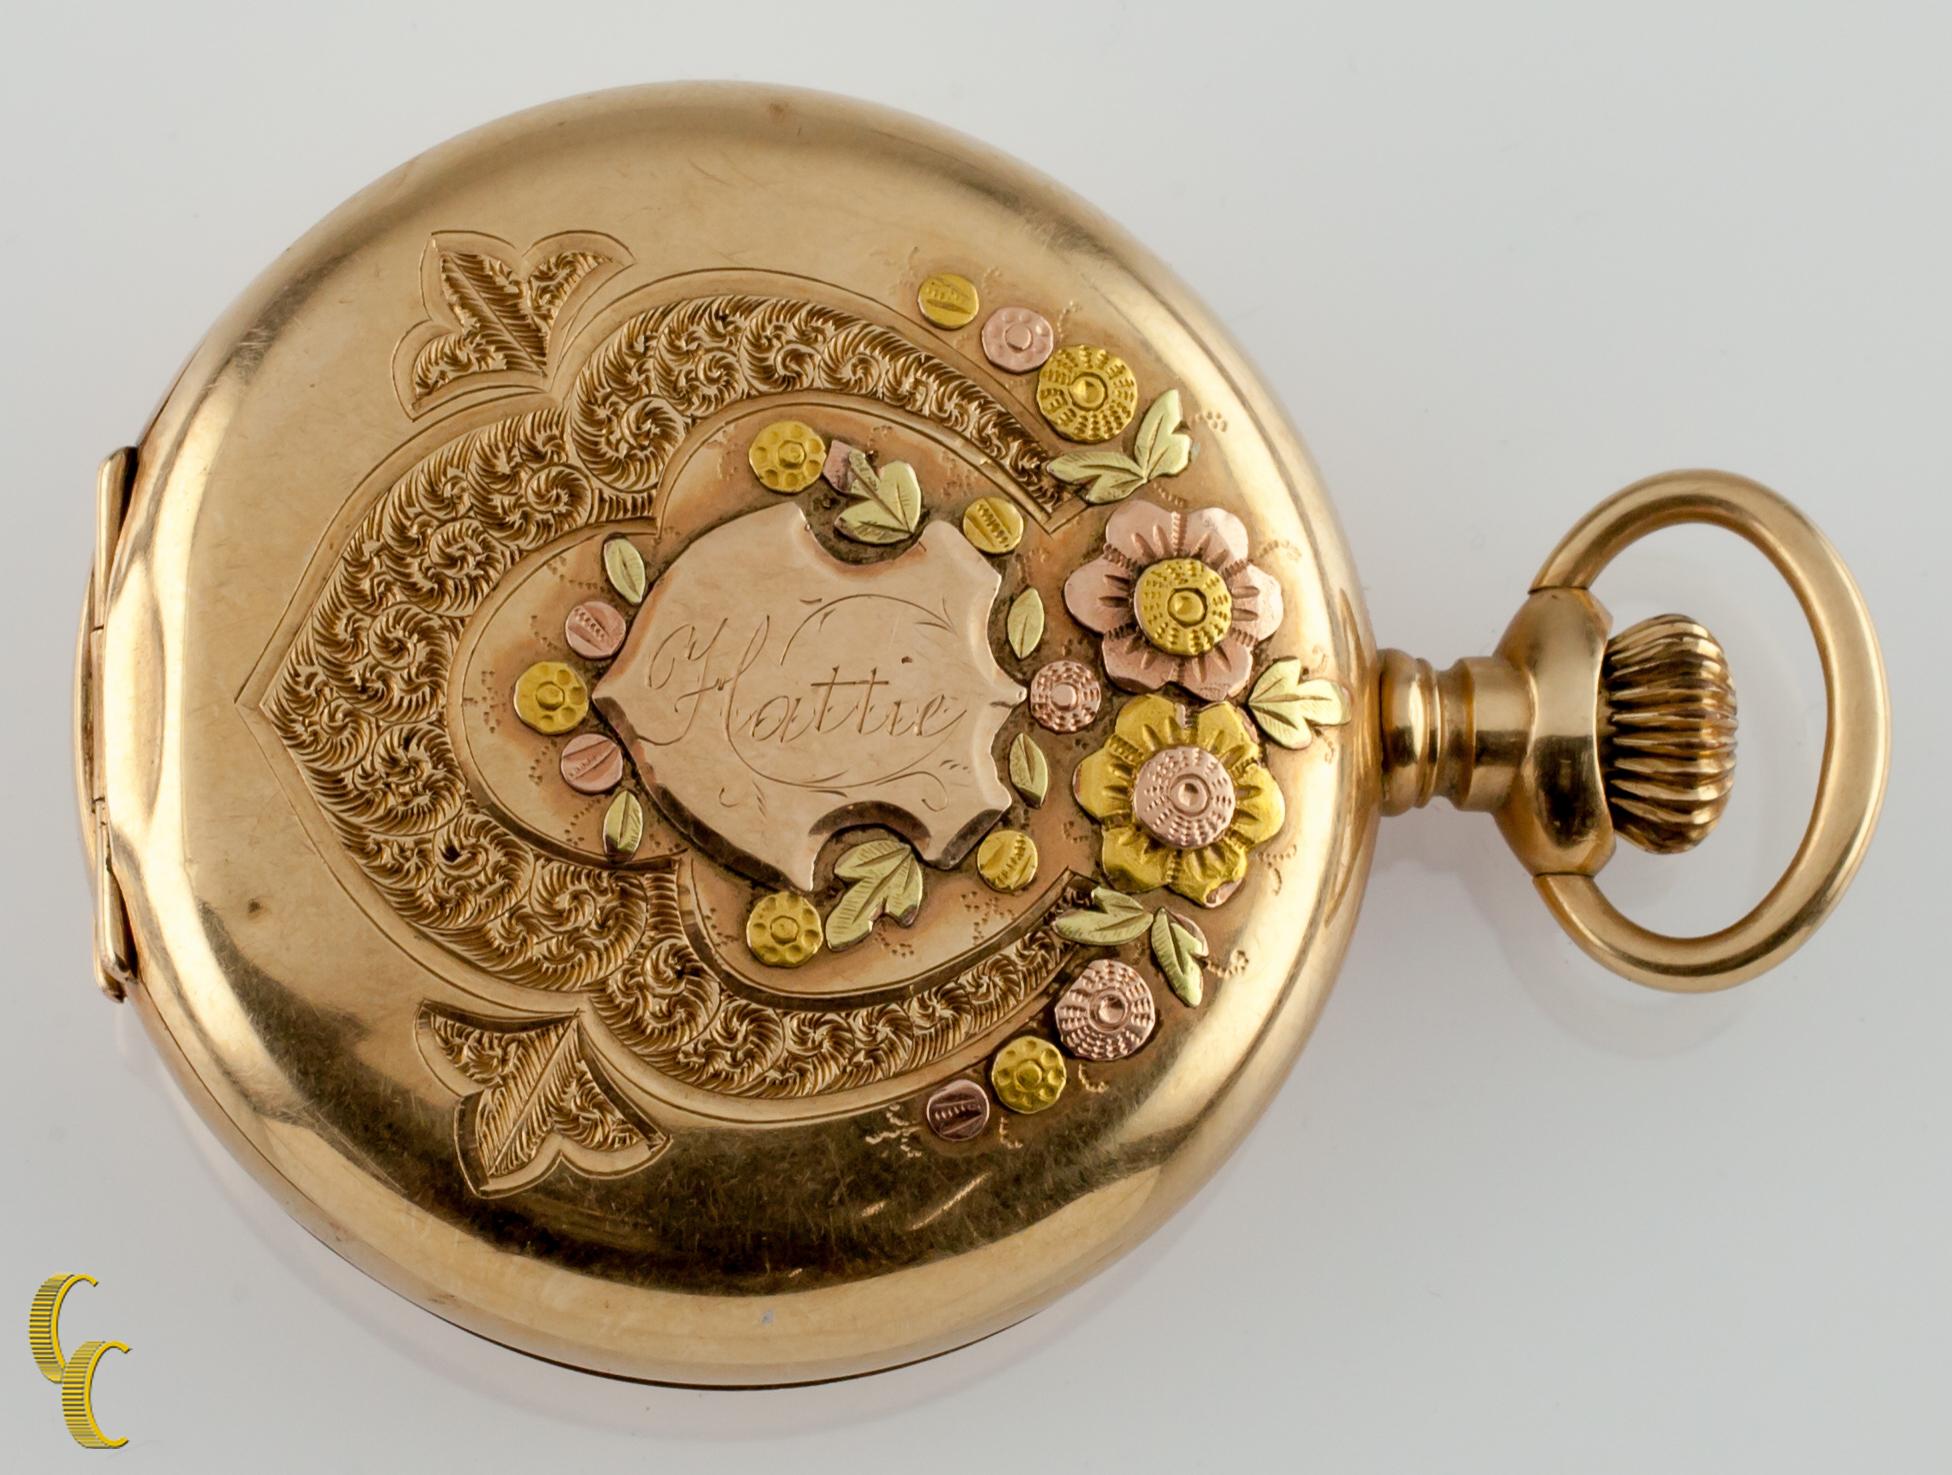 Beautiful Antique Waltham Pocket Watch w/ White Dial Including Cobalt Blue Hands & Dedicated Second Dial
14k Yellow Solid Gold Case w/ Intricate Multi-Color Gold Overlay Design on Front of Case
Same Design w/ Diamond Solitaire on Reverse
Black Roman